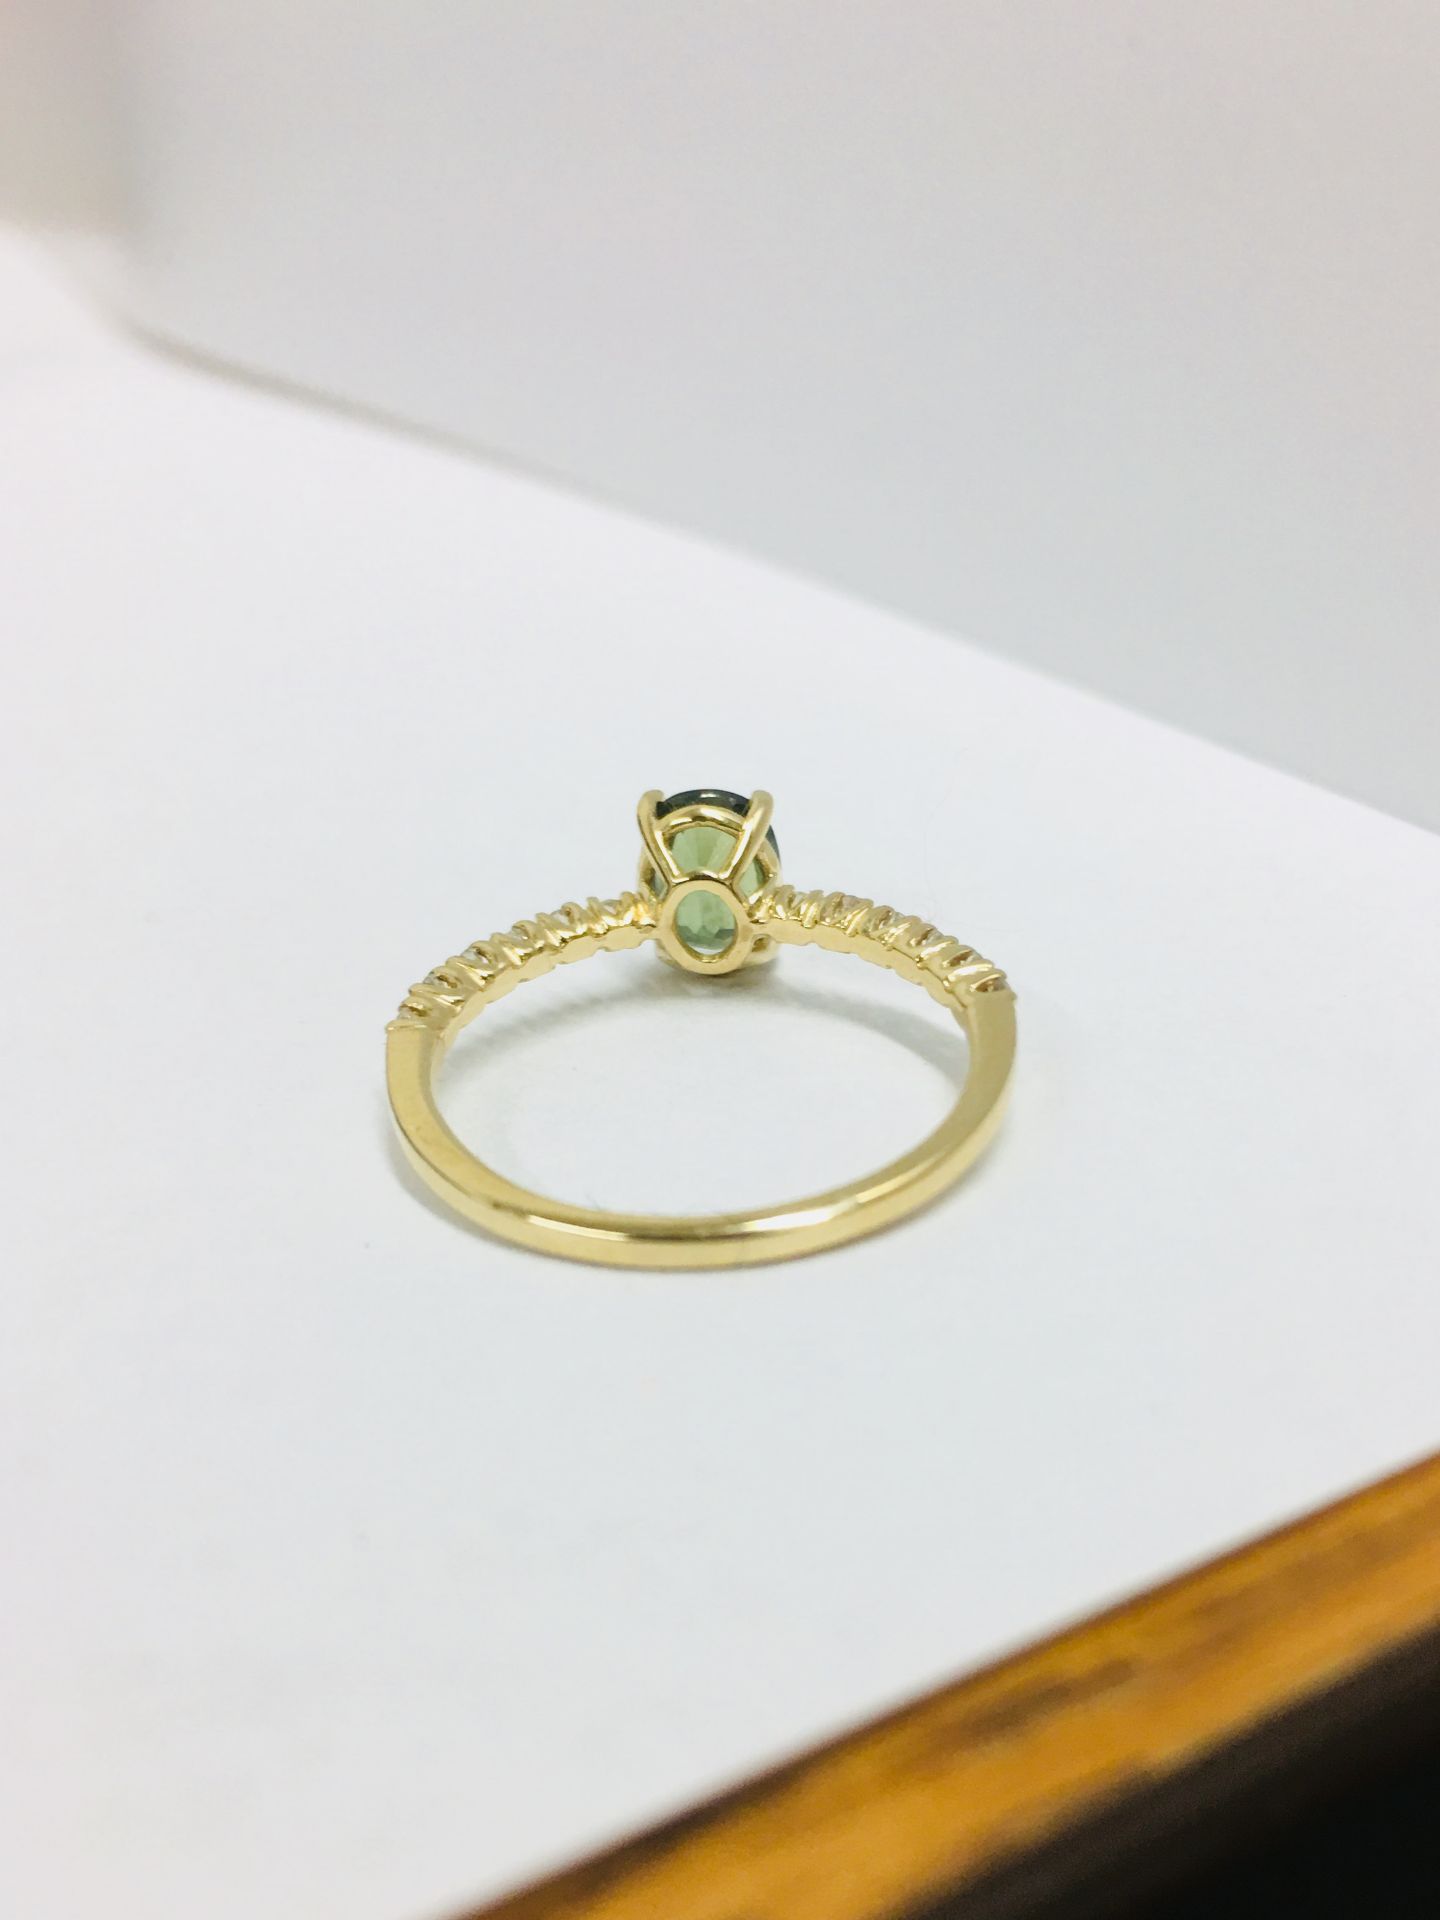 0.80Ct / 0.12Ct Green Sapphire And Diamond Dress Ring. - Image 3 of 4